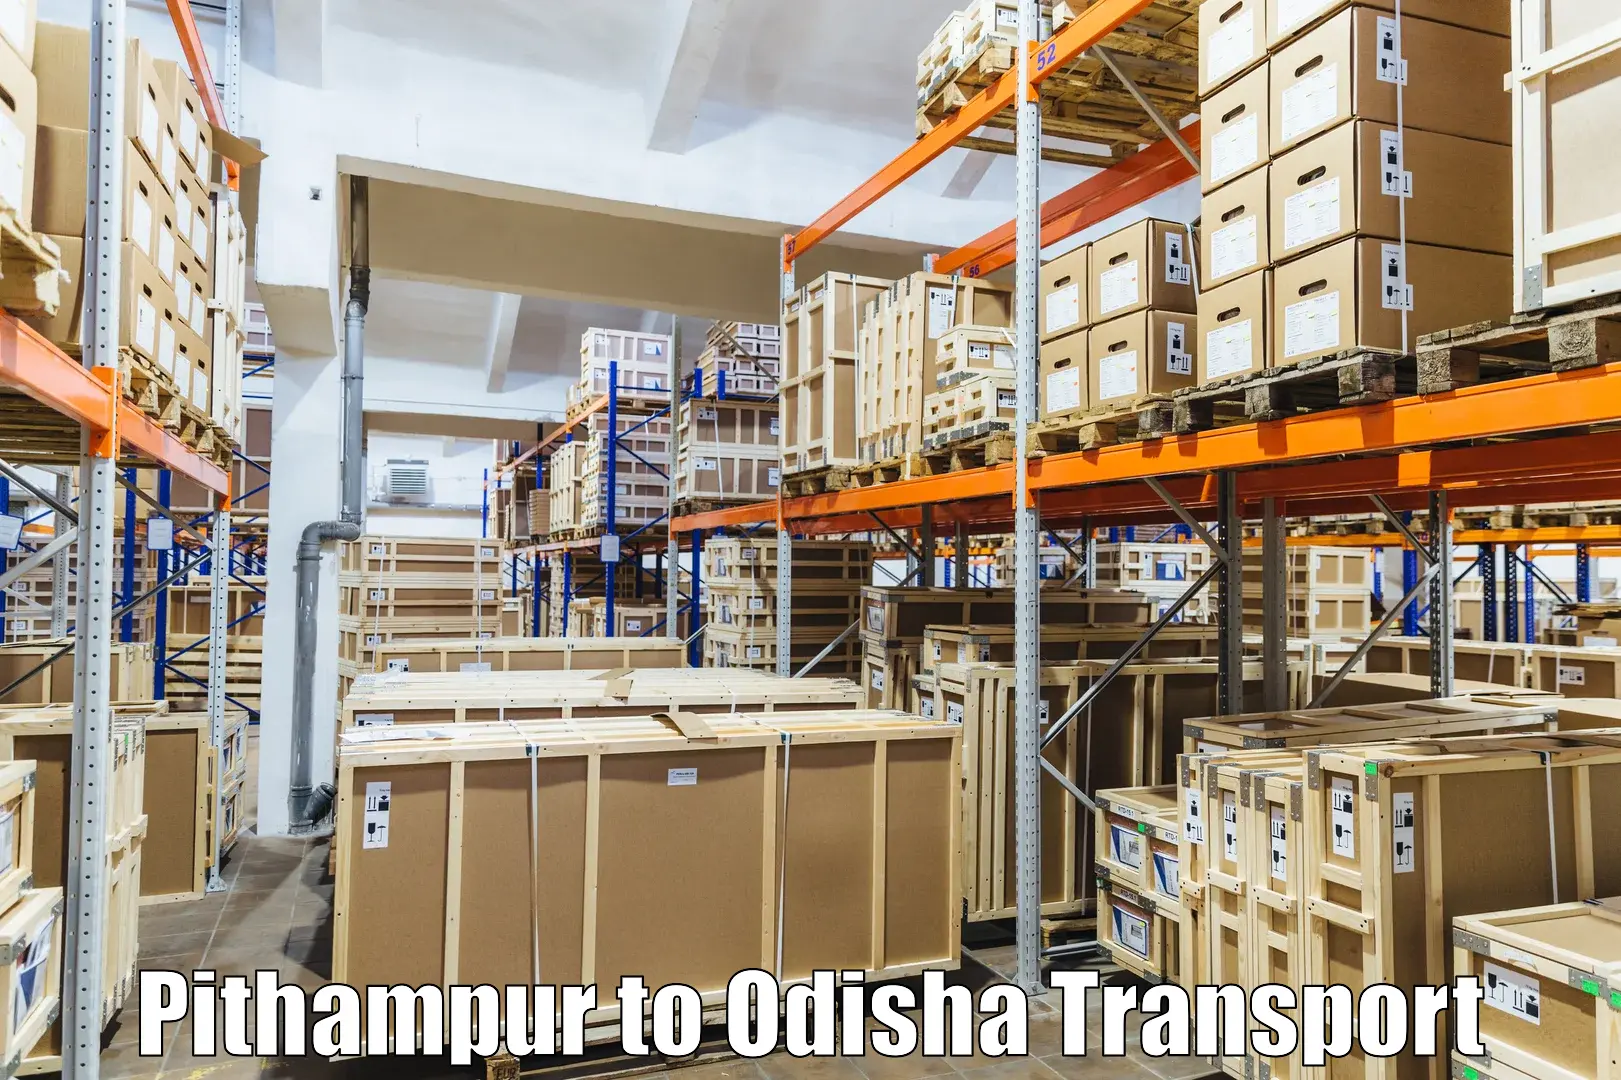 Commercial transport service Pithampur to Basta